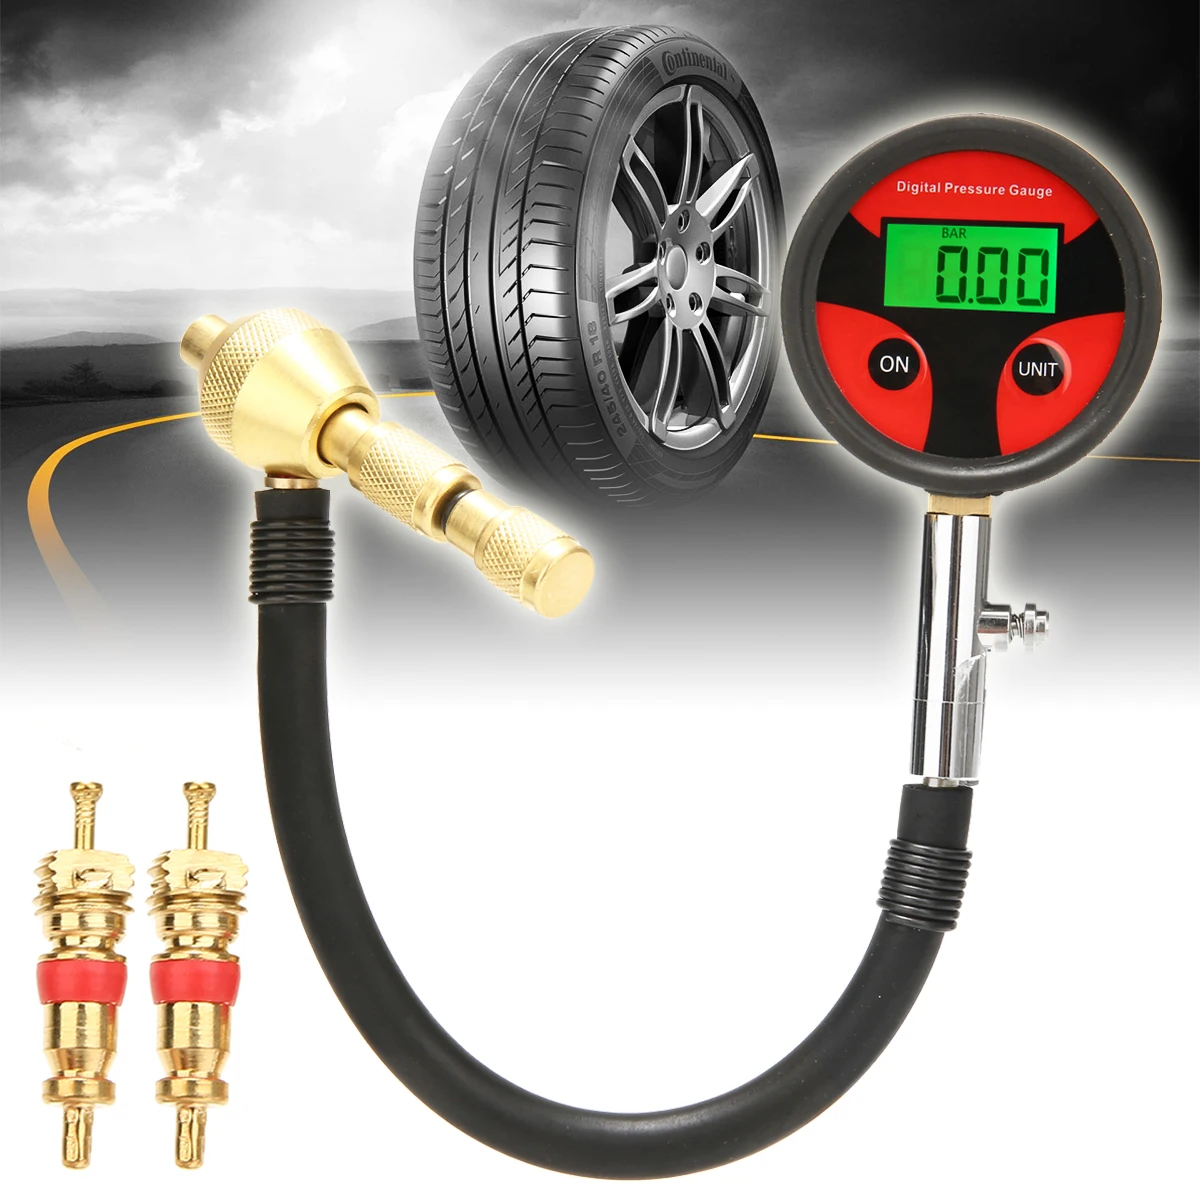 

Professional Tire Rapid Deflator Pressure Gauge Psi BAR KPA KGF Diagnostic Tools for 4X4 Large Offroad Tires With 2 Tire Cores